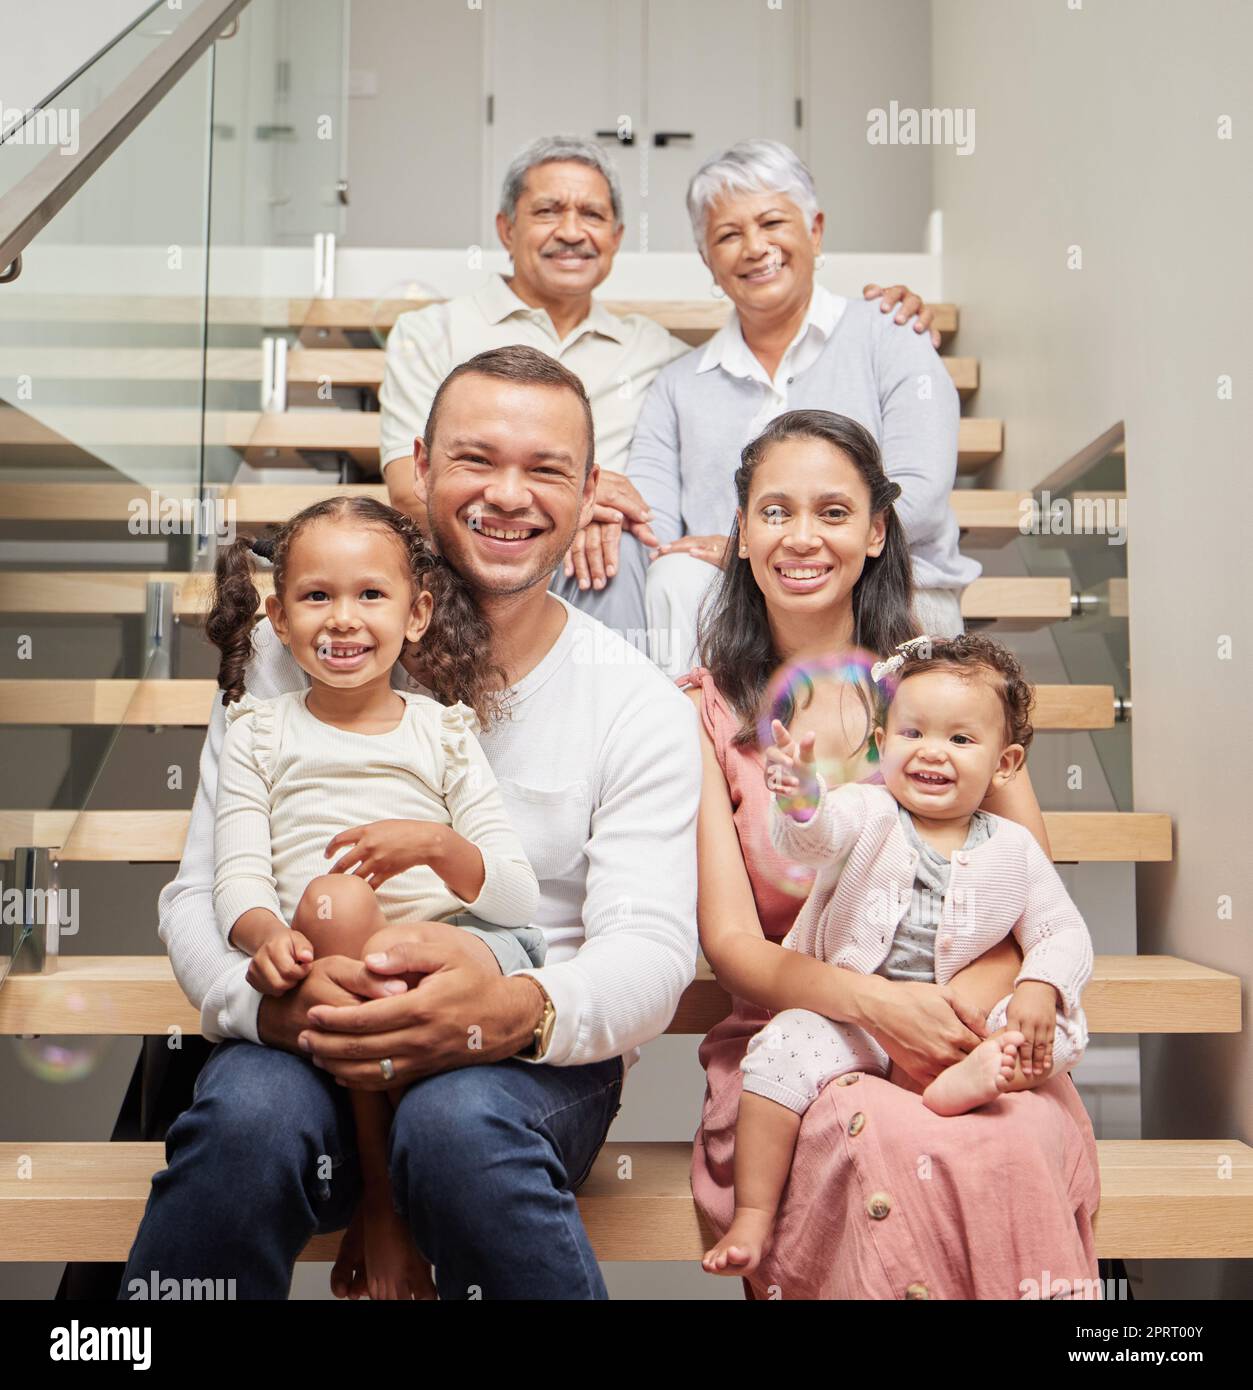 Big family, three generation and happiness of children, parents and grandparents sitting together on stairs in their home while smiling. Bond, support and closeness of kids with man and woman Stock Photo